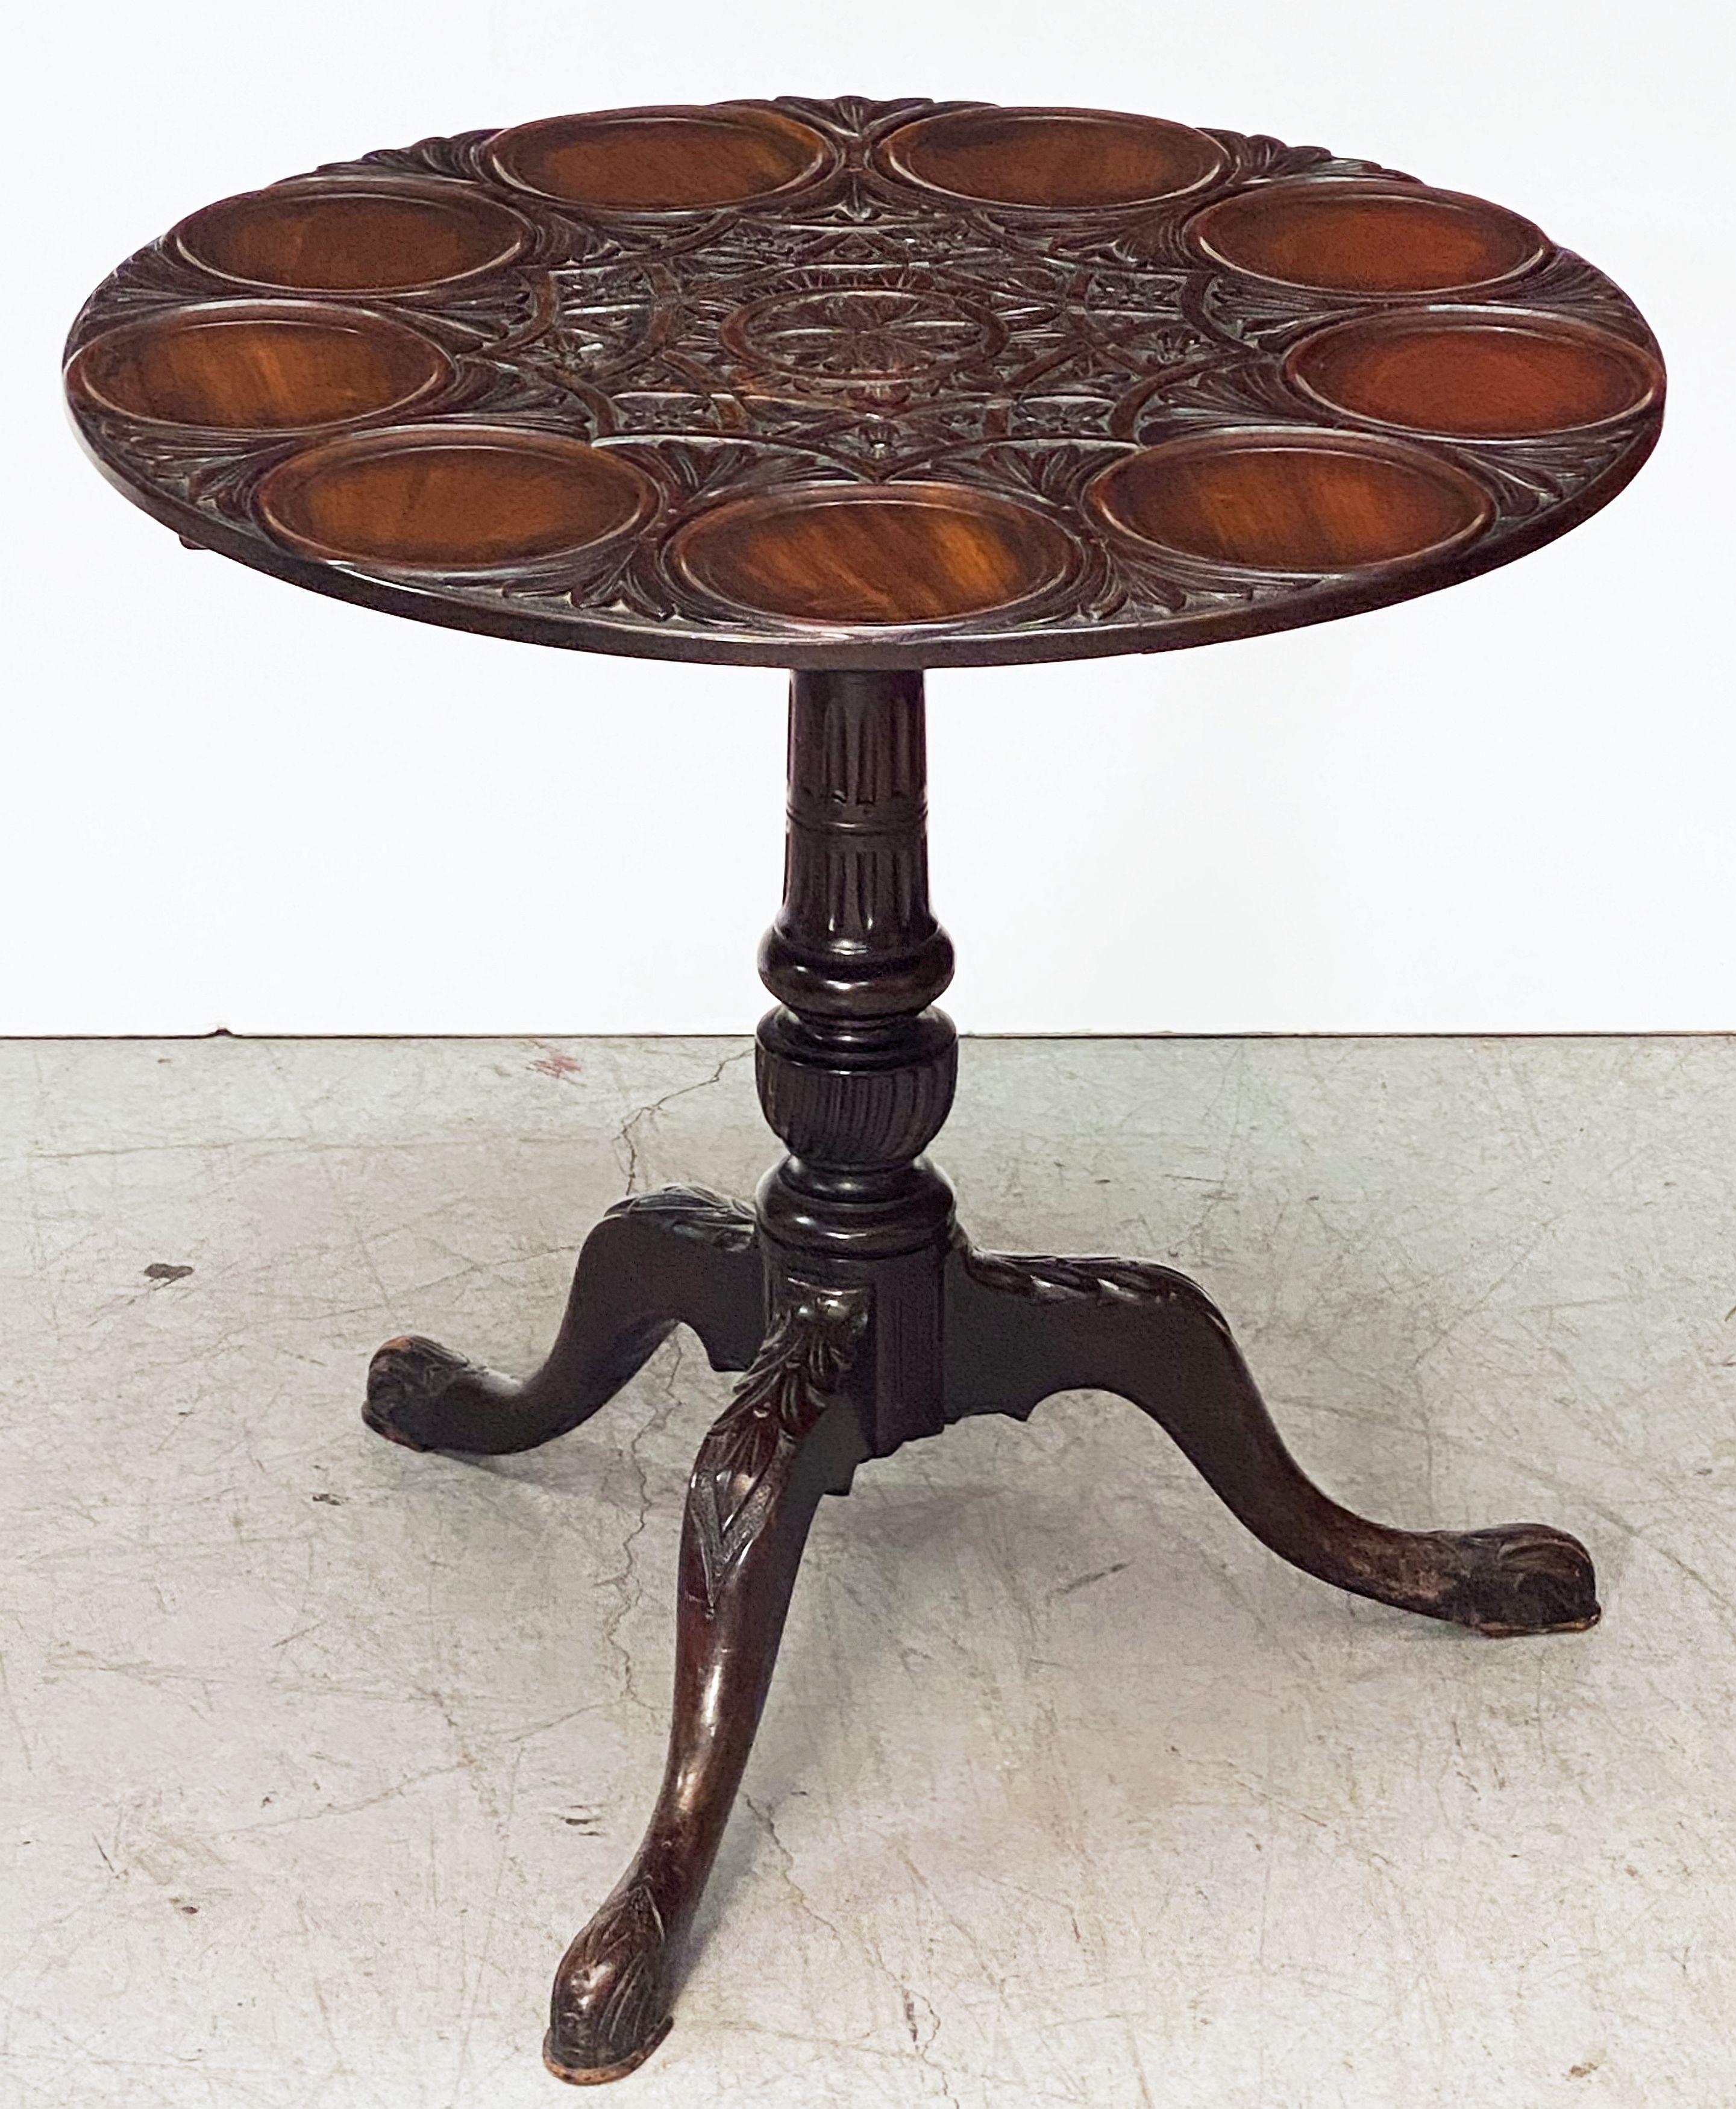 A fine English tilt-top supper or tea table of mahogany, featuring a round or circular top and place-settings for serving plates, over a turned tripod pedestal column support on pad foot legs.
  